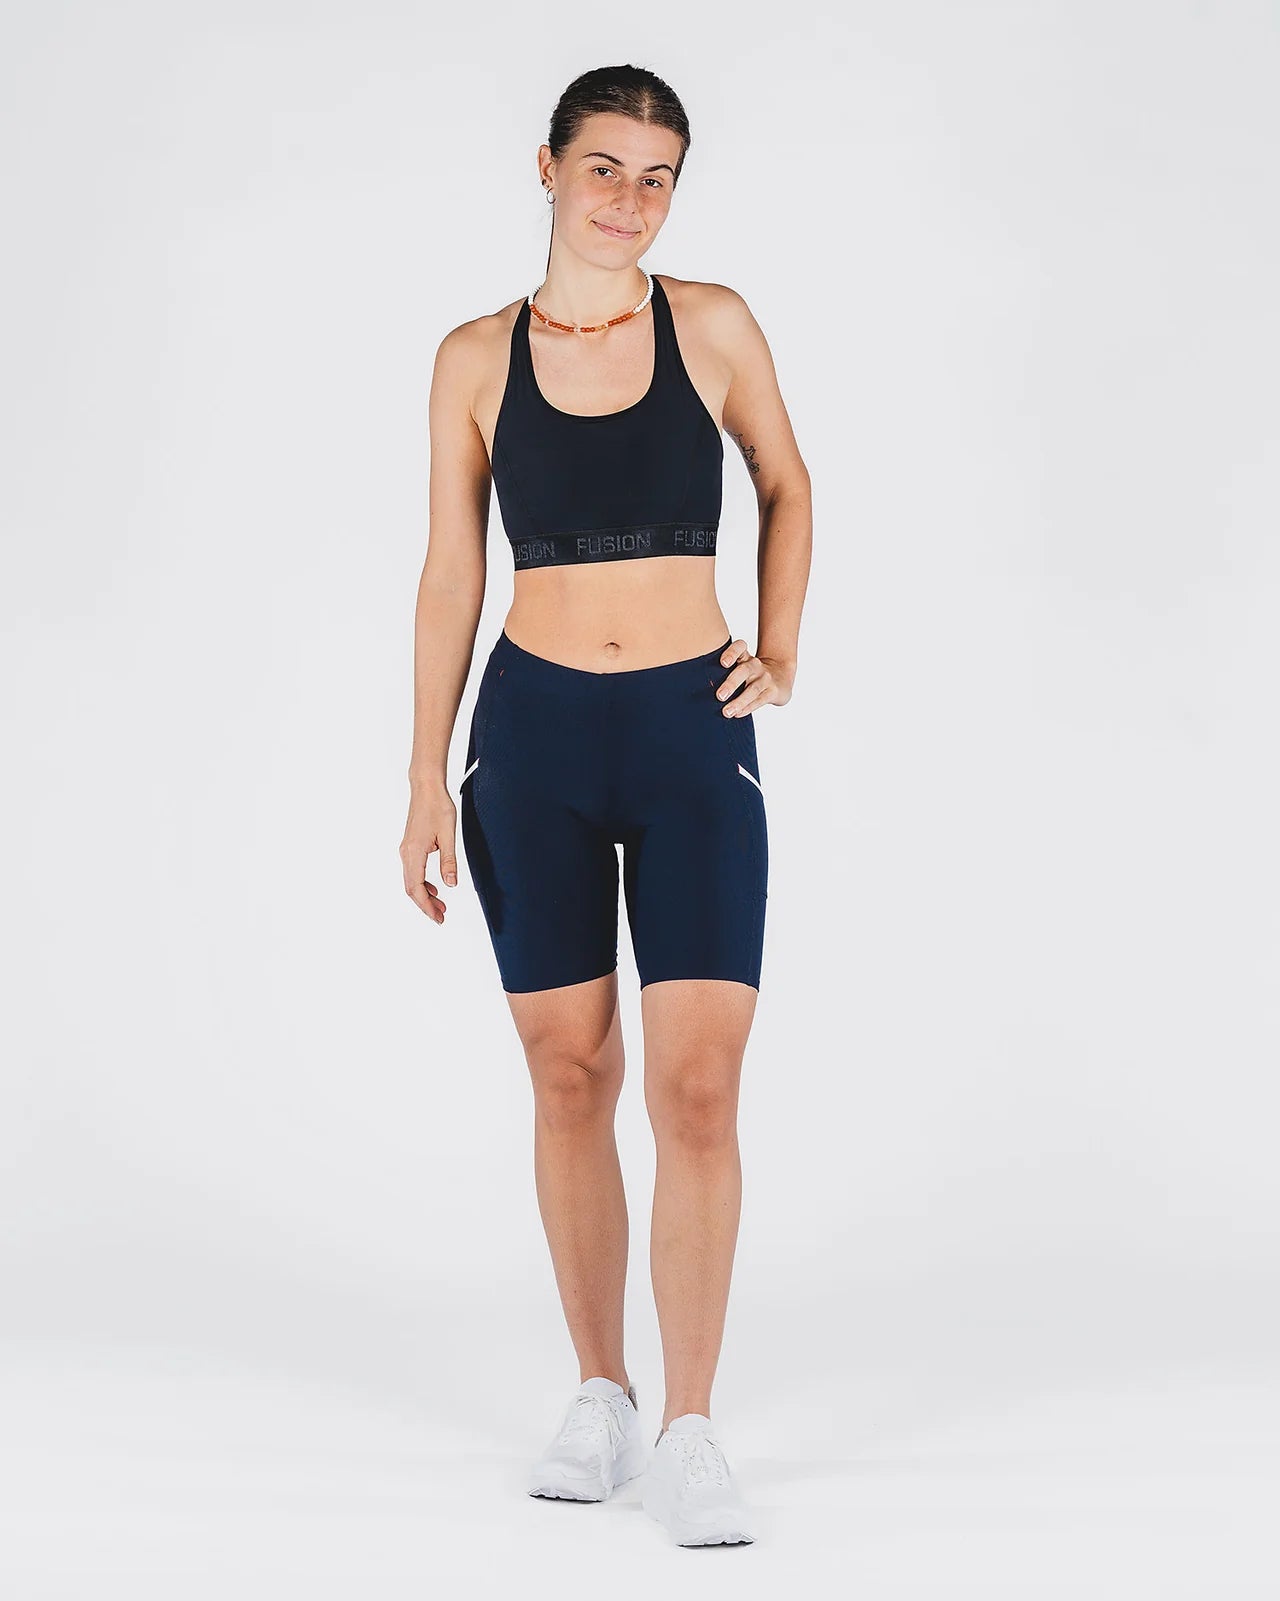 Running pants: Fusion C3 Long Tights Runningtrousers - S